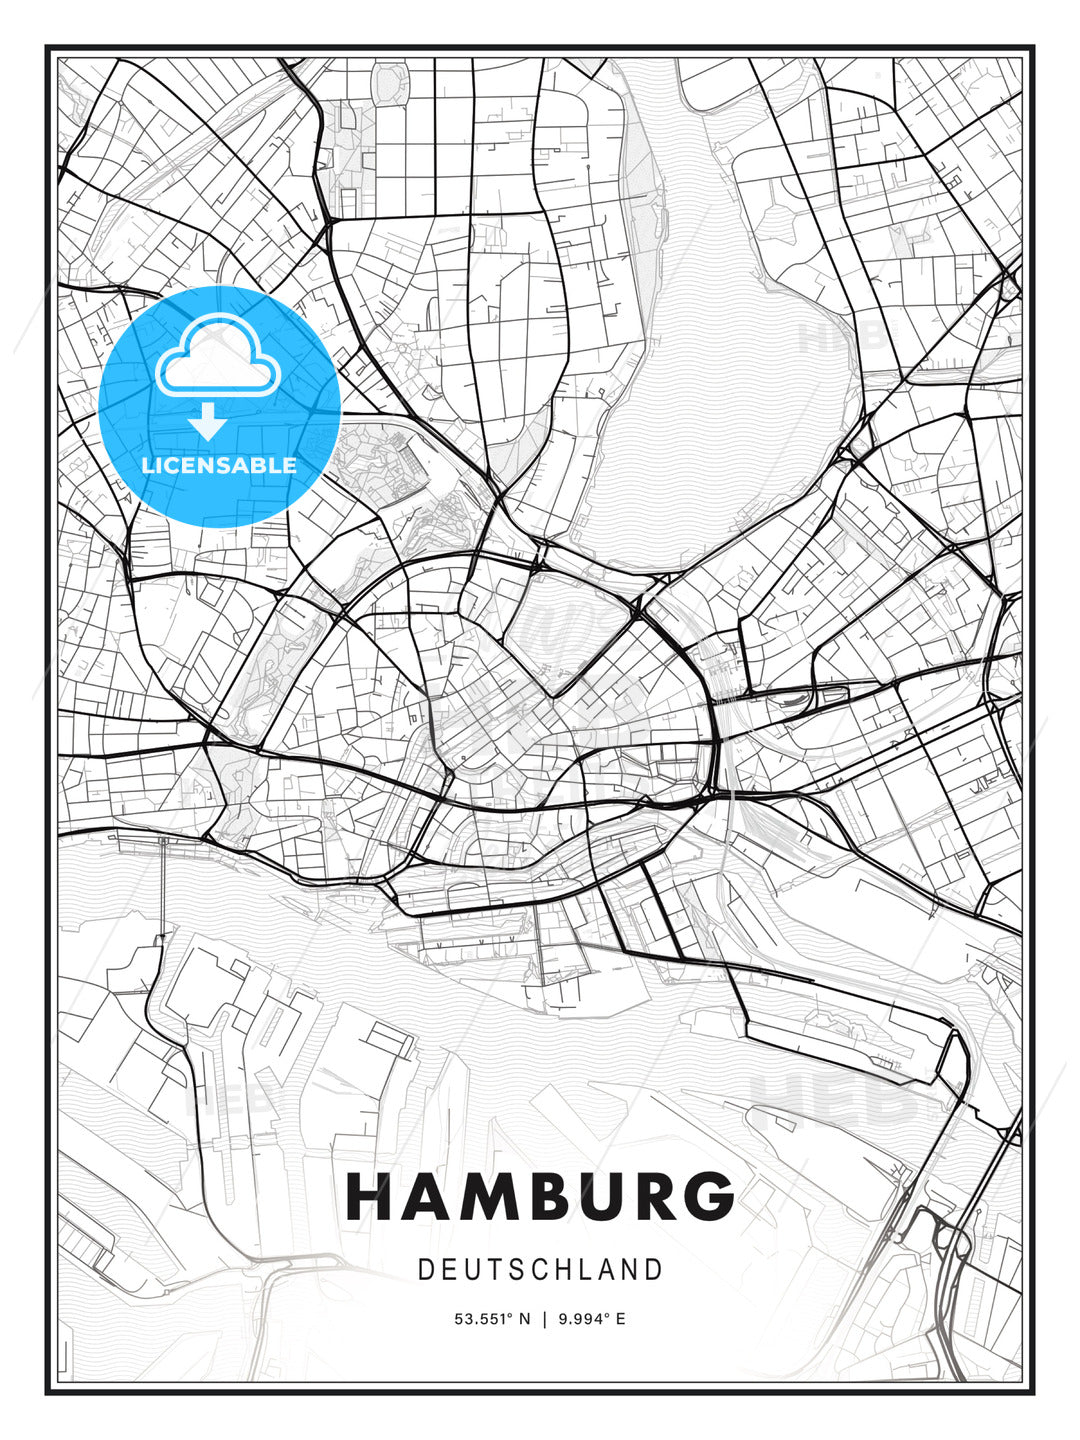 Hamburg, Germany, Modern Print Template in Various Formats - HEBSTREITS Sketches